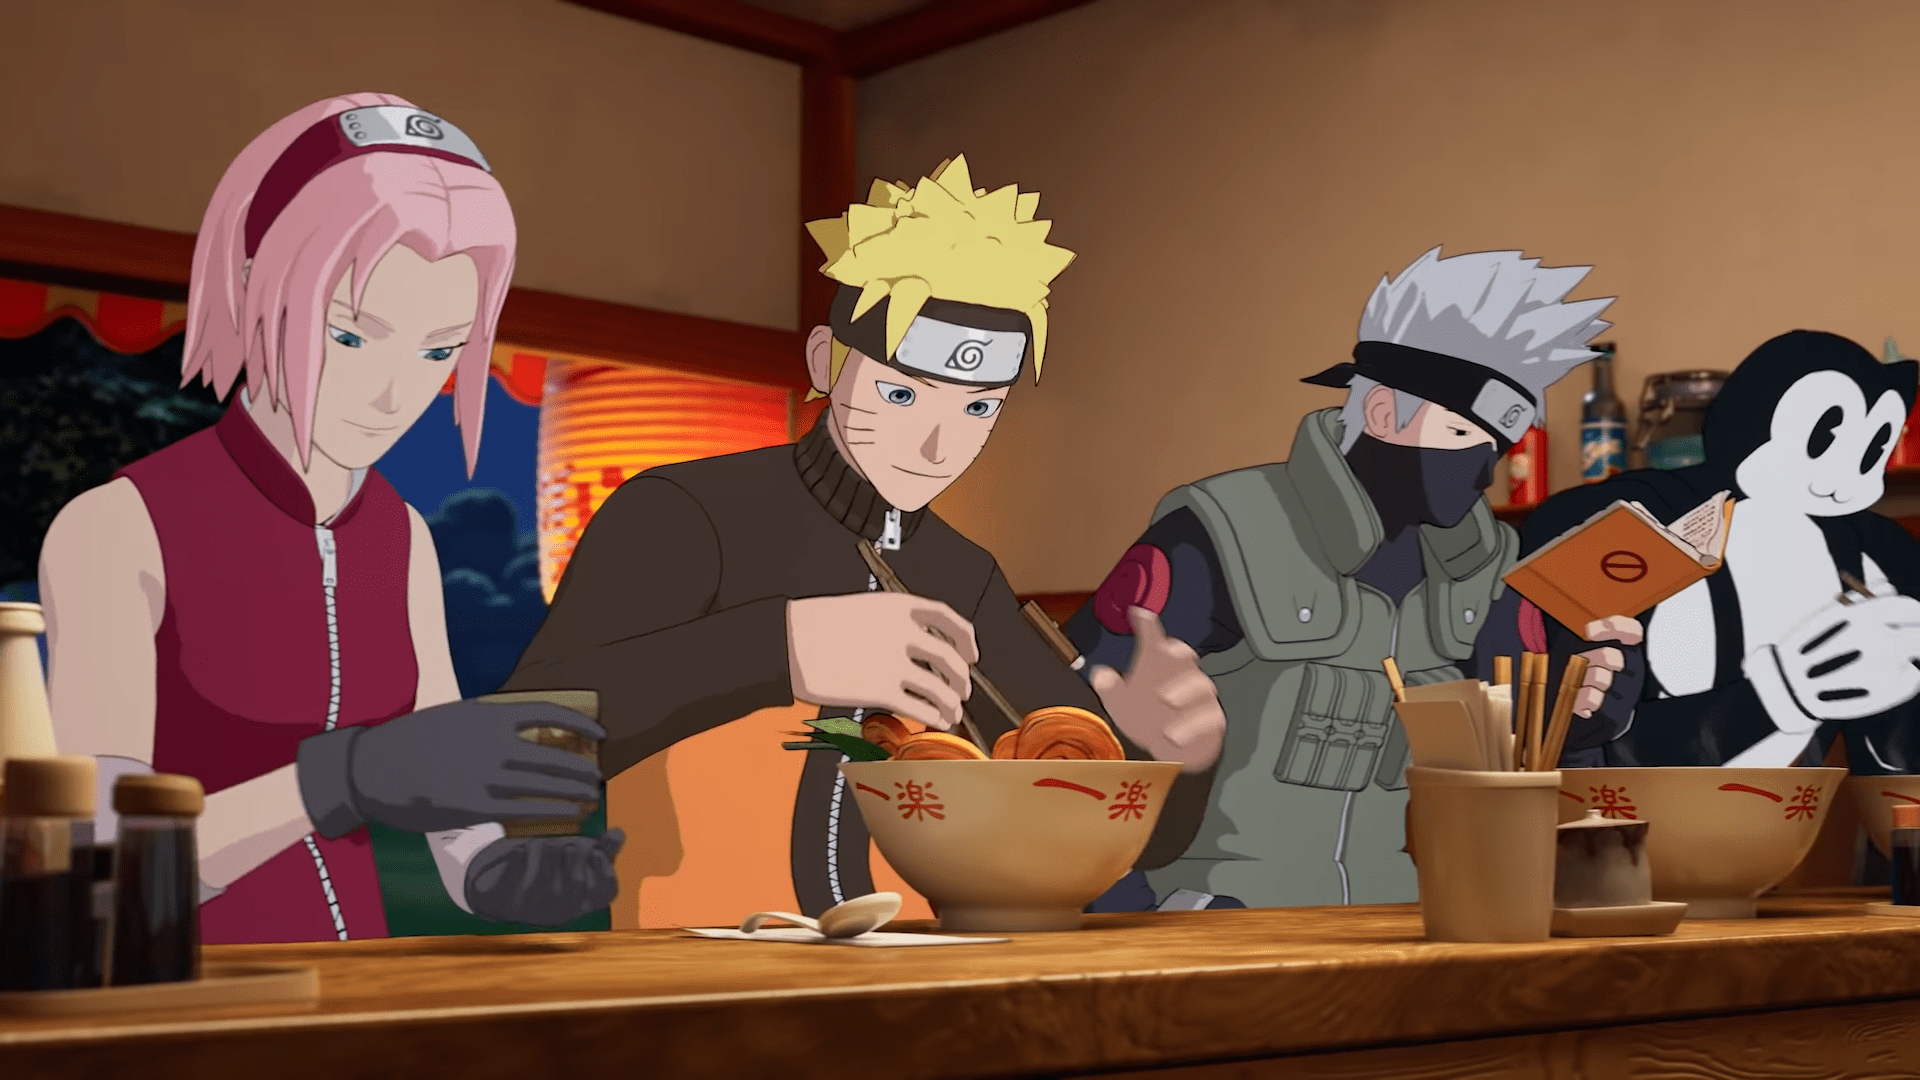 Fortnite X Naruto Shippuden Details and Released